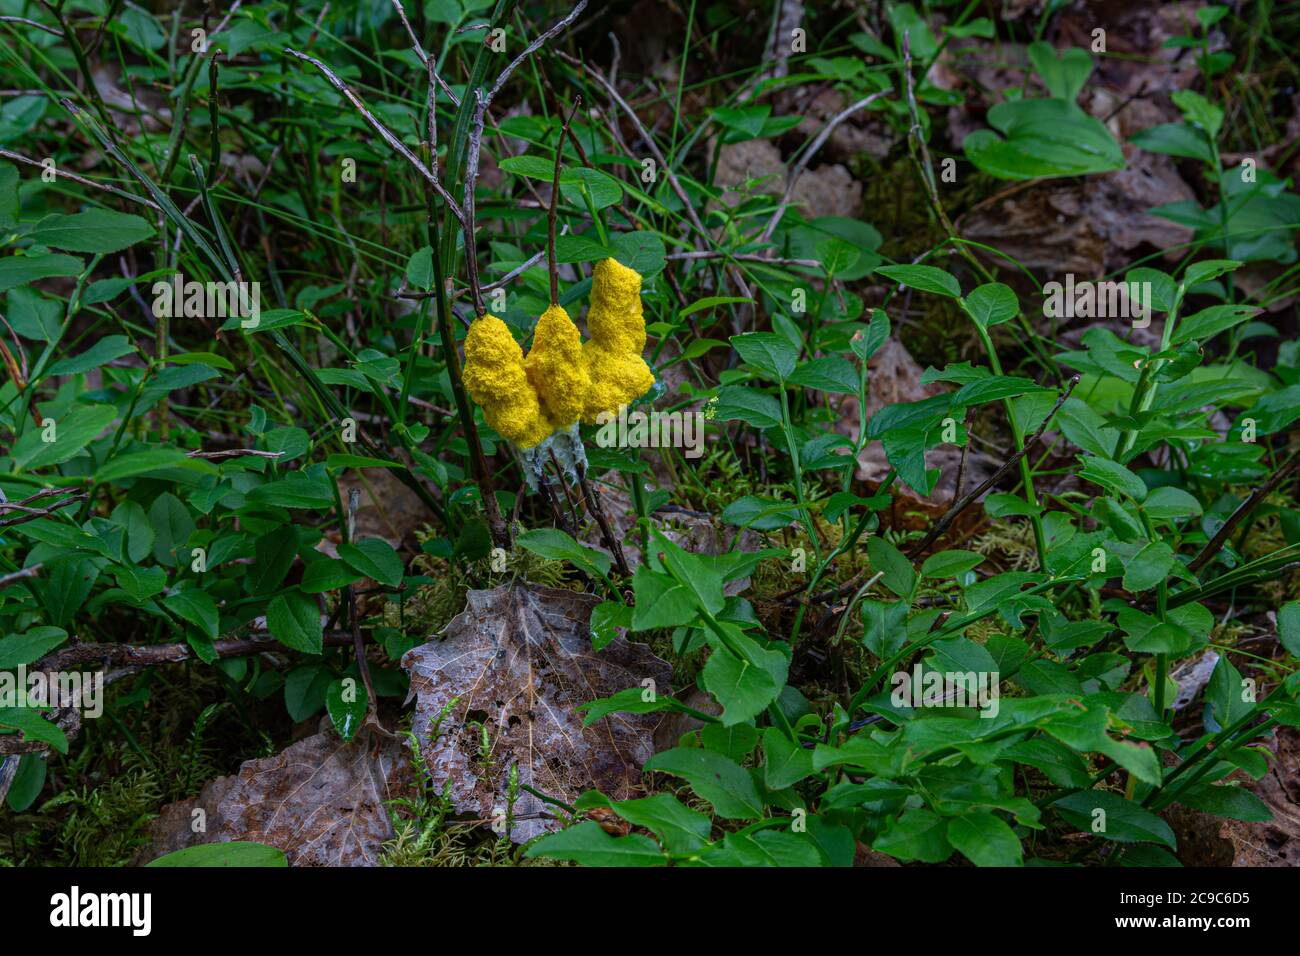 Flowers of tan or scrambled egg slime (Fuligo septica) on stem of blueberry in Northern Sweden. Stock Photo